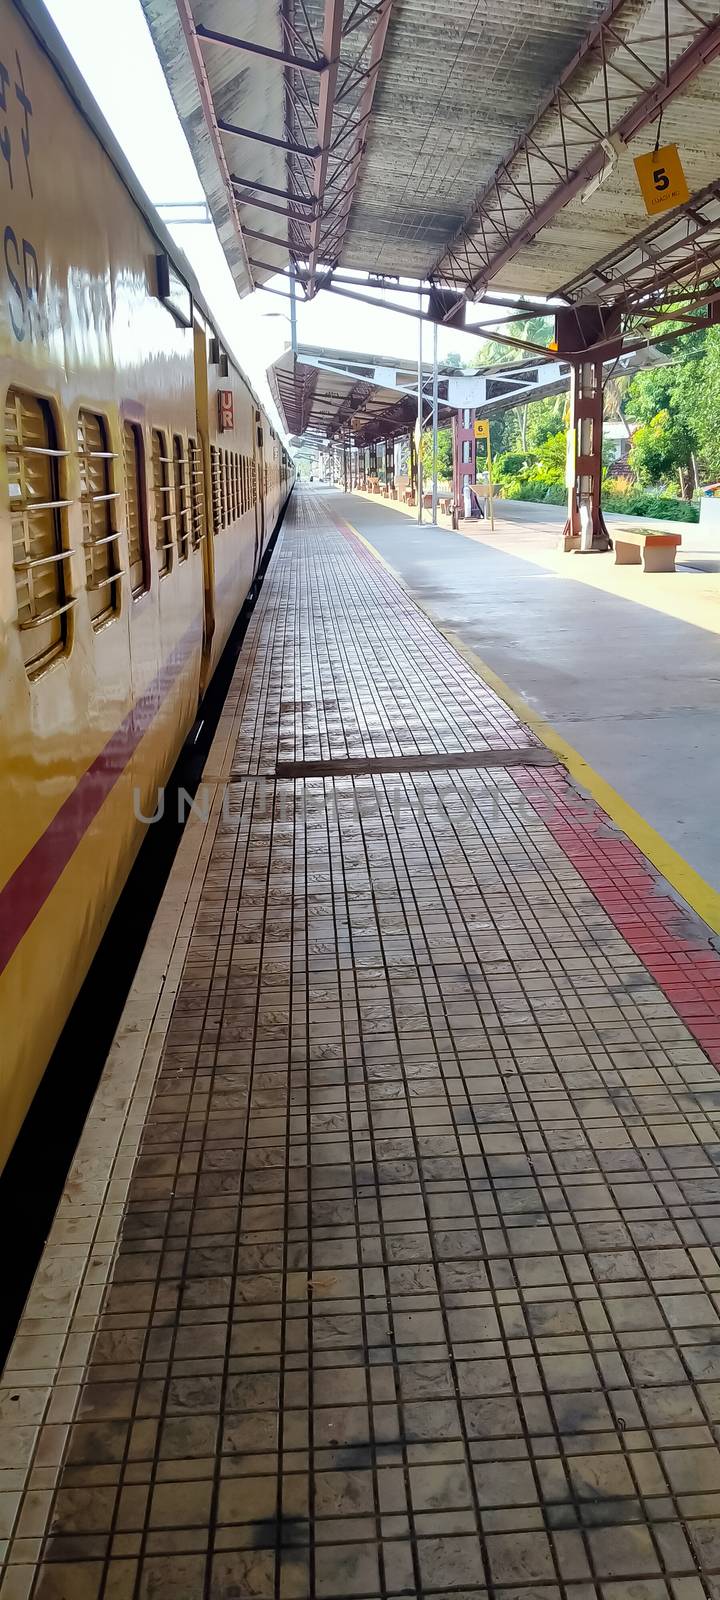 Guruvayur, Kerala, INDIA - March 15: Empty platform under a shed and a train at the railway station on March 15, 2020 in Guruvayur, India.